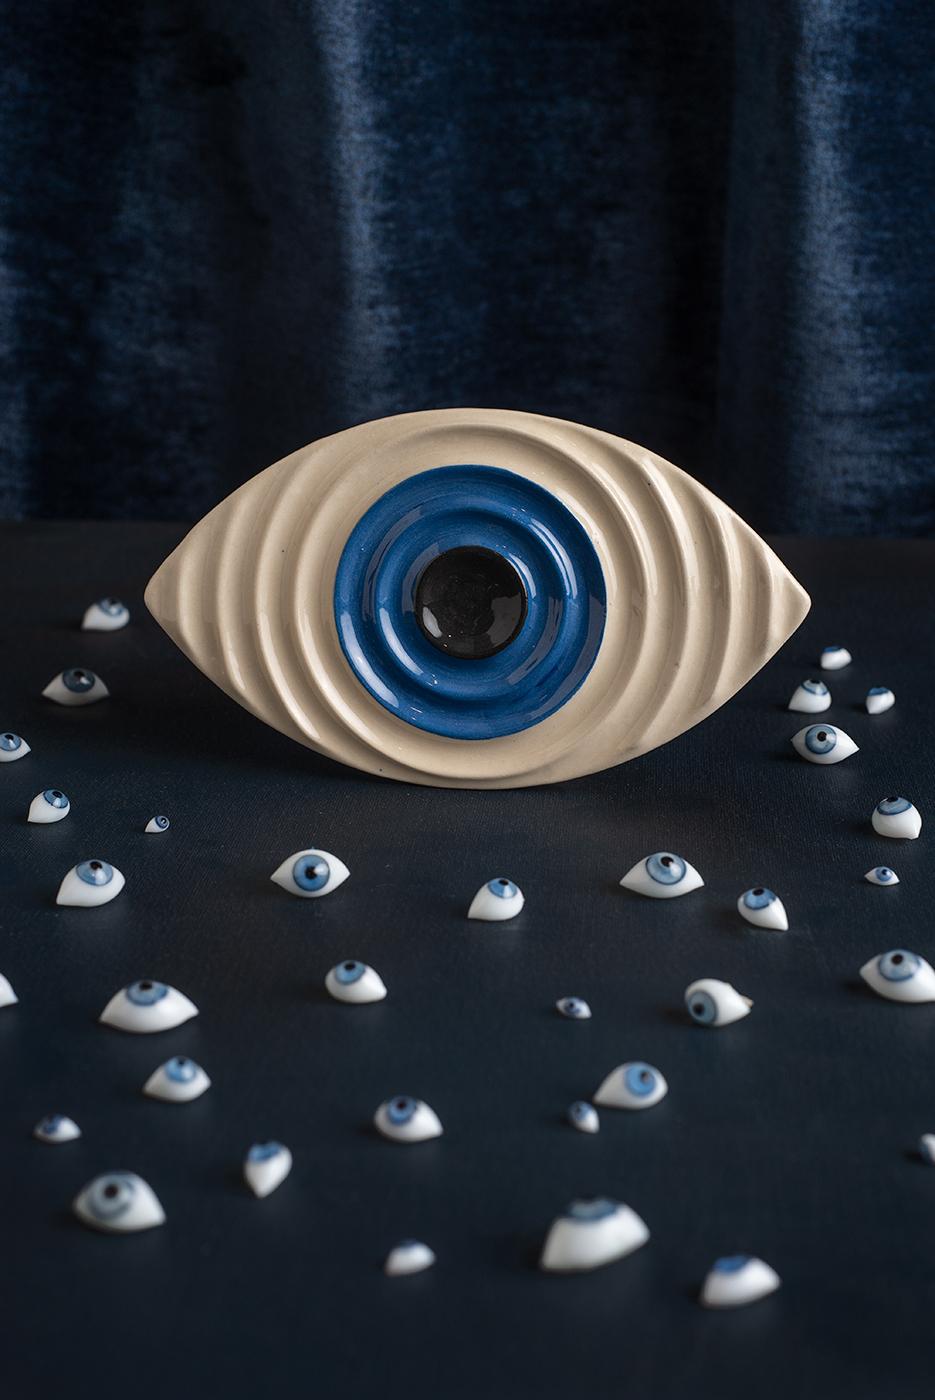 Introducing Bruci's exquisite ceramic tray in the form of an all-seeing eye, a sophisticated and modern design. Handcrafted with the utmost care and attention to detail, this unique piece follows the ancient tradition of utilizing eyes as a symbol